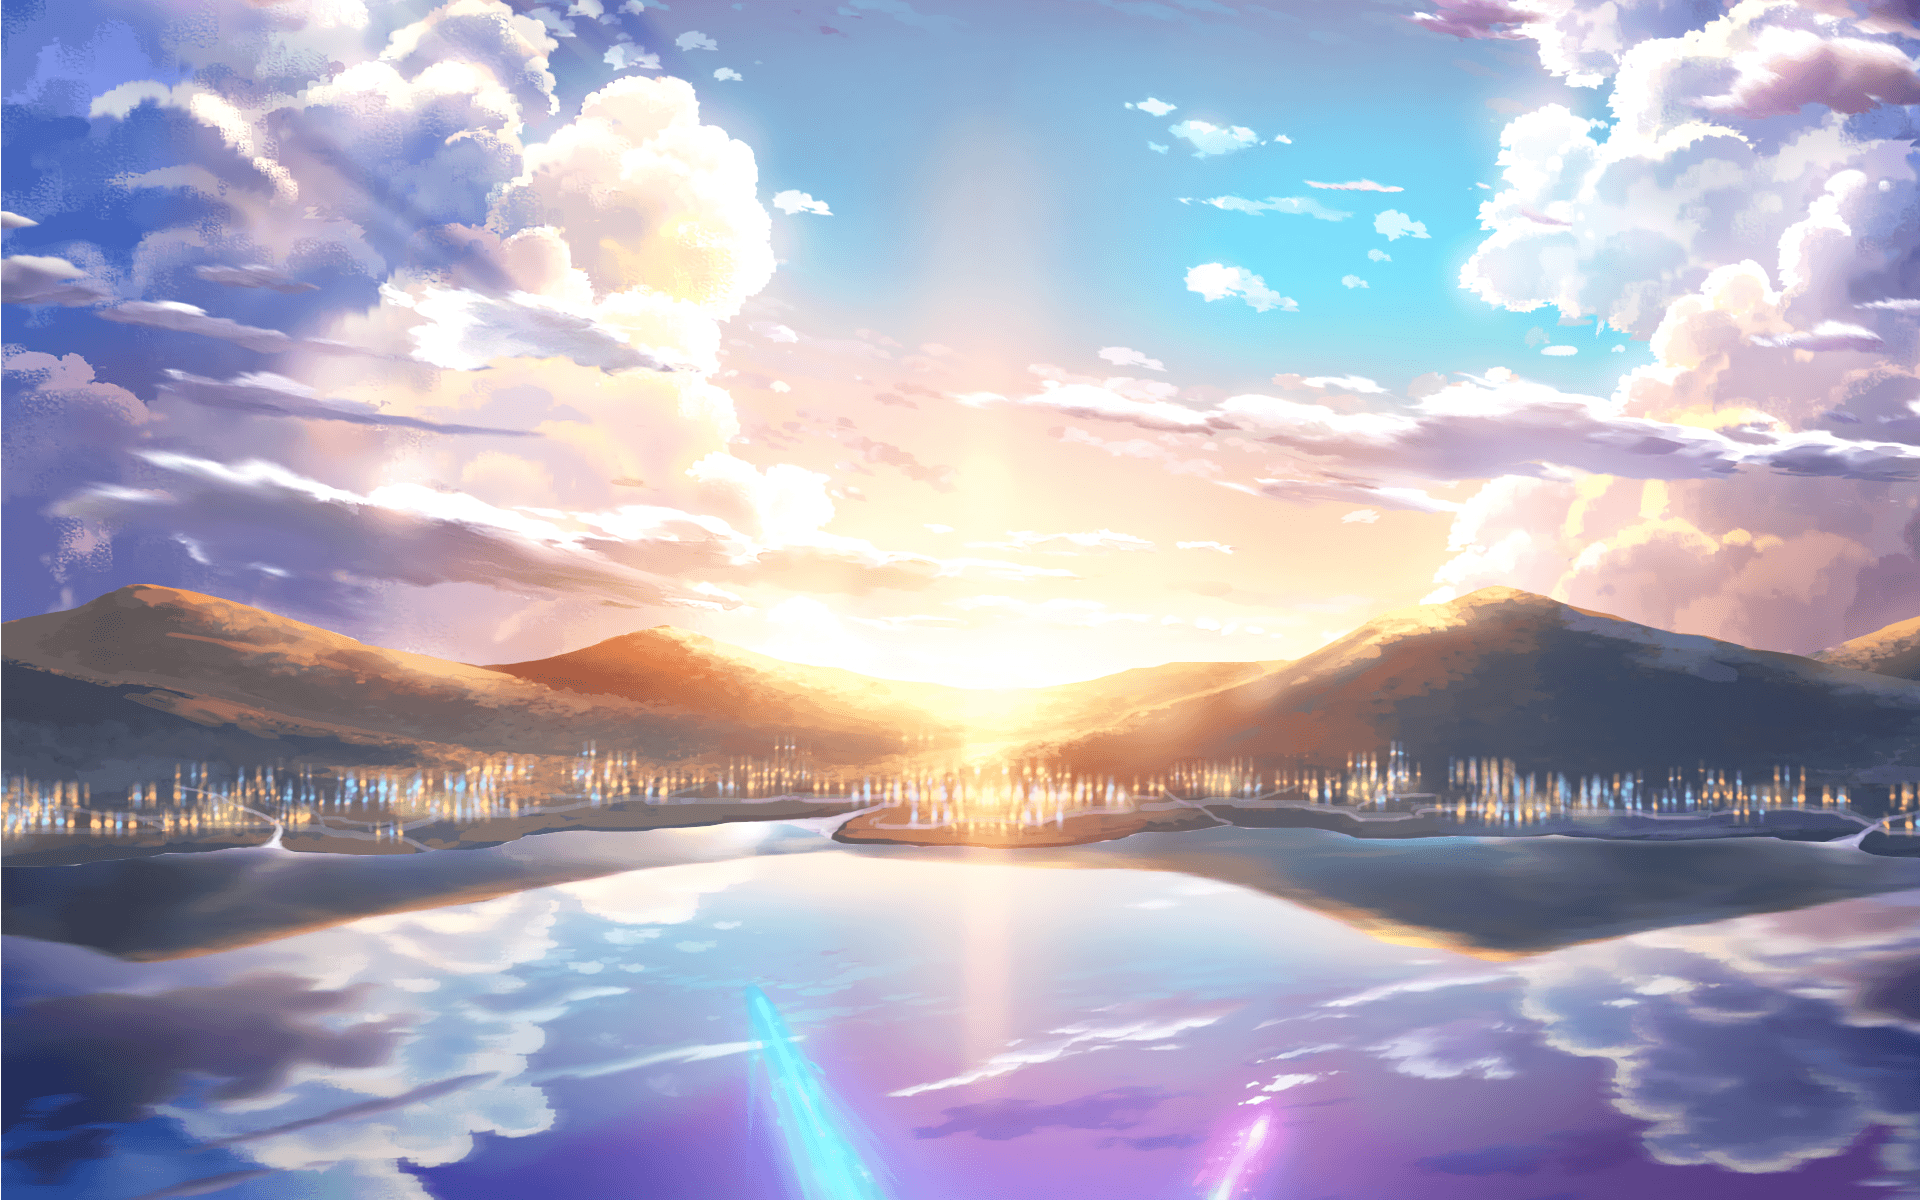 Your Name Wallpaper Hd / Free Download Your Name Background Id - Hd